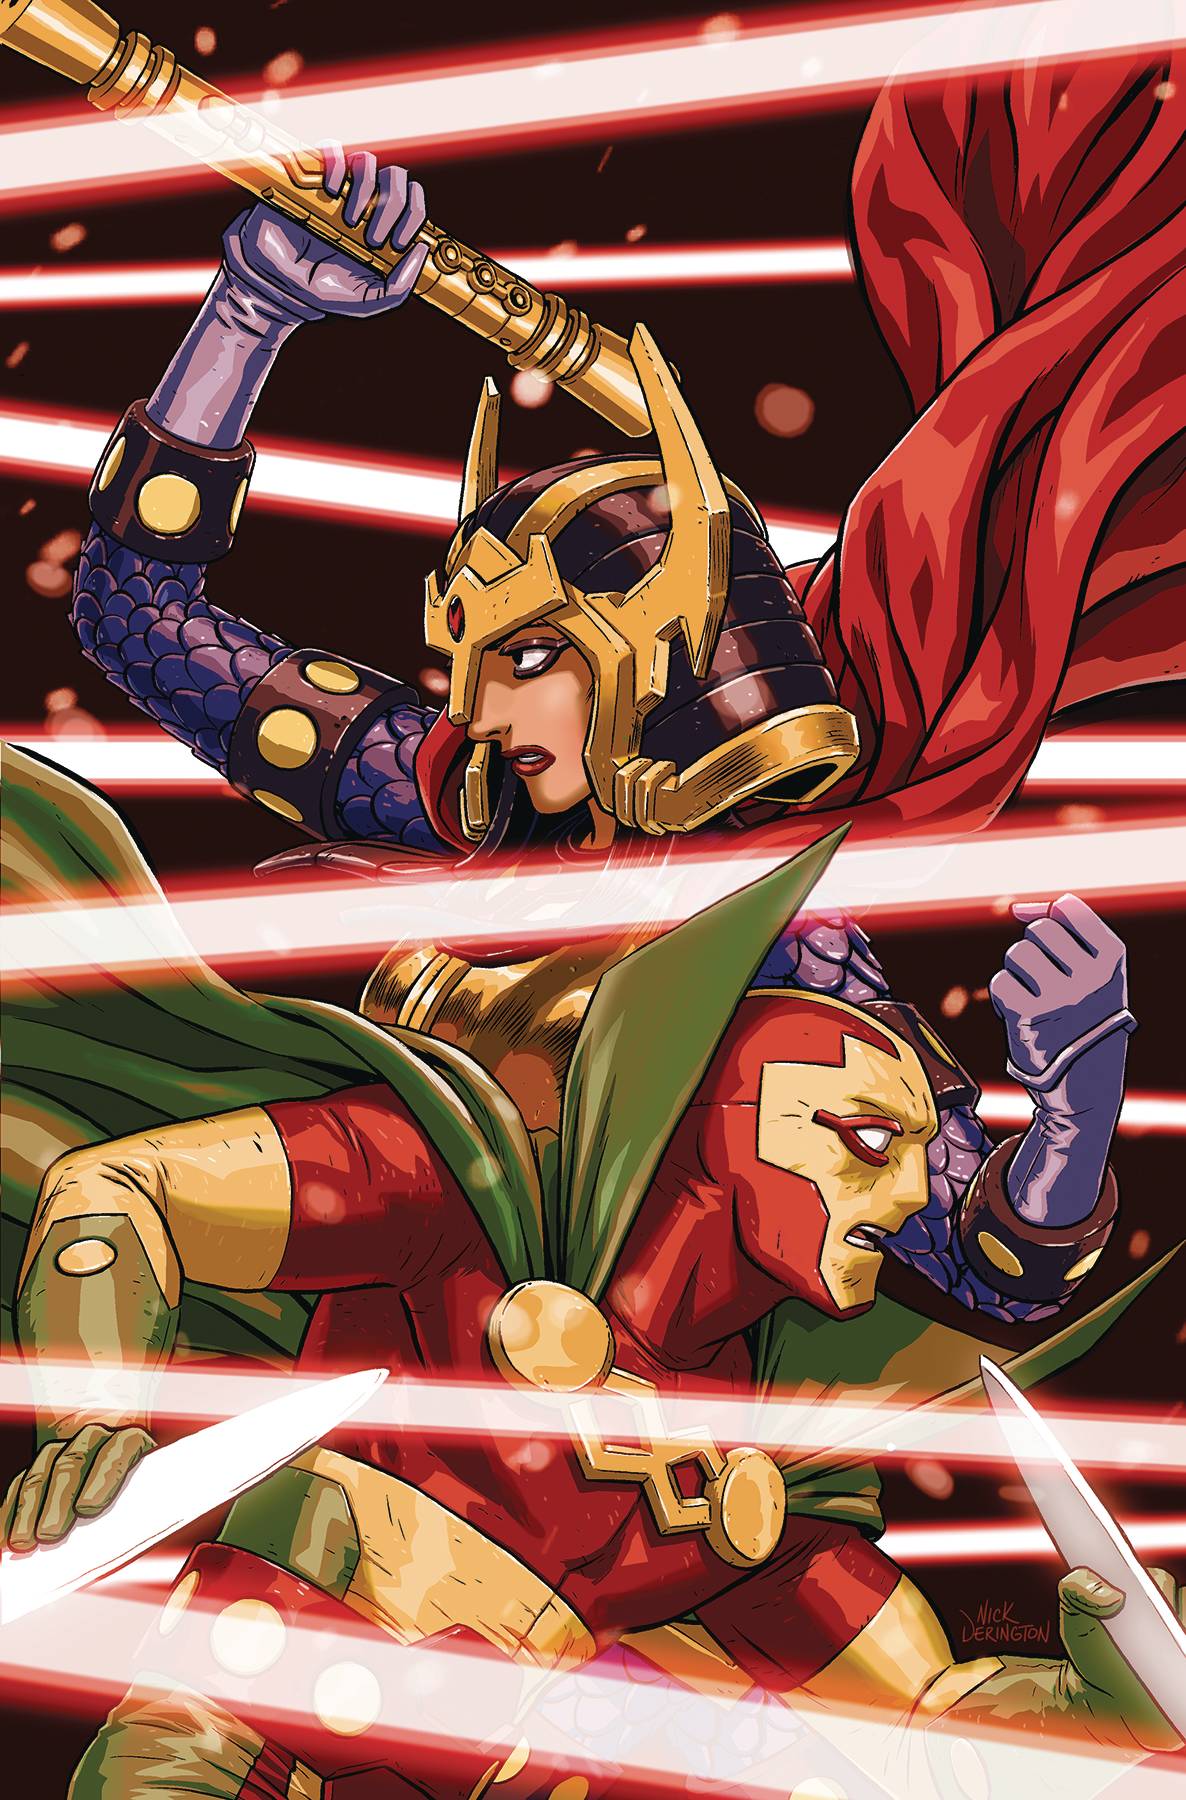 Mister Miracle #6 (Of 12) (Mature)